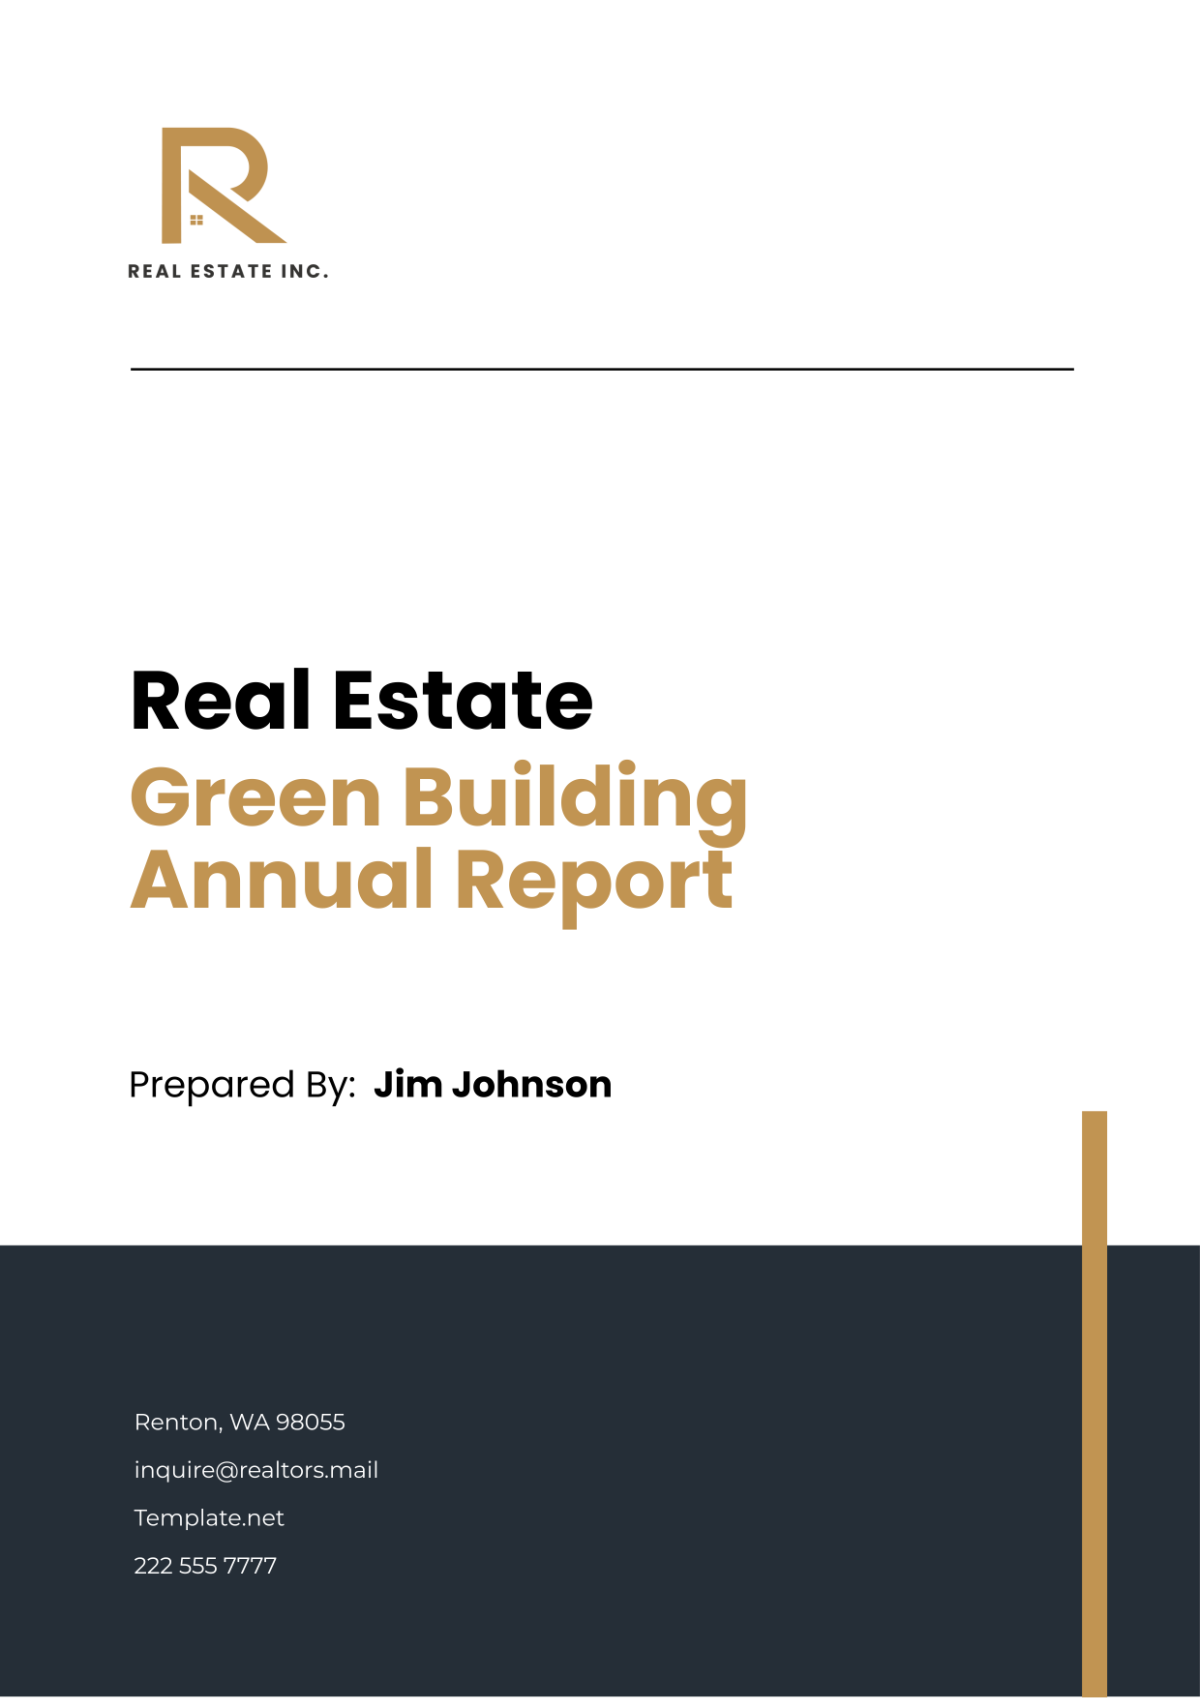 Real Estate Green Building Annual Report Template